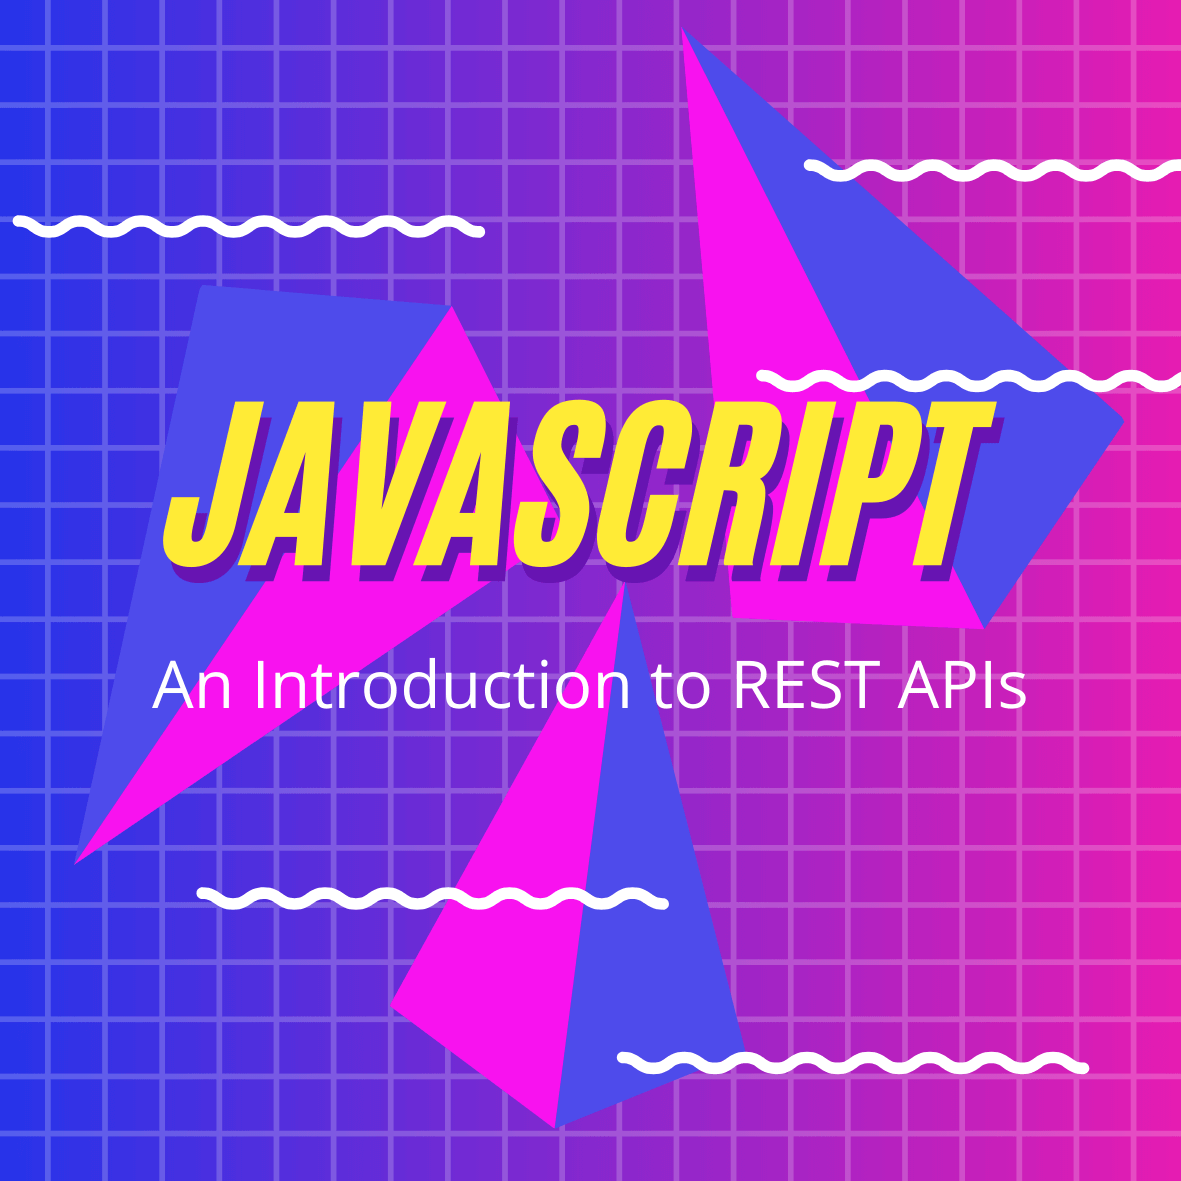 An Introduction to REST APIs